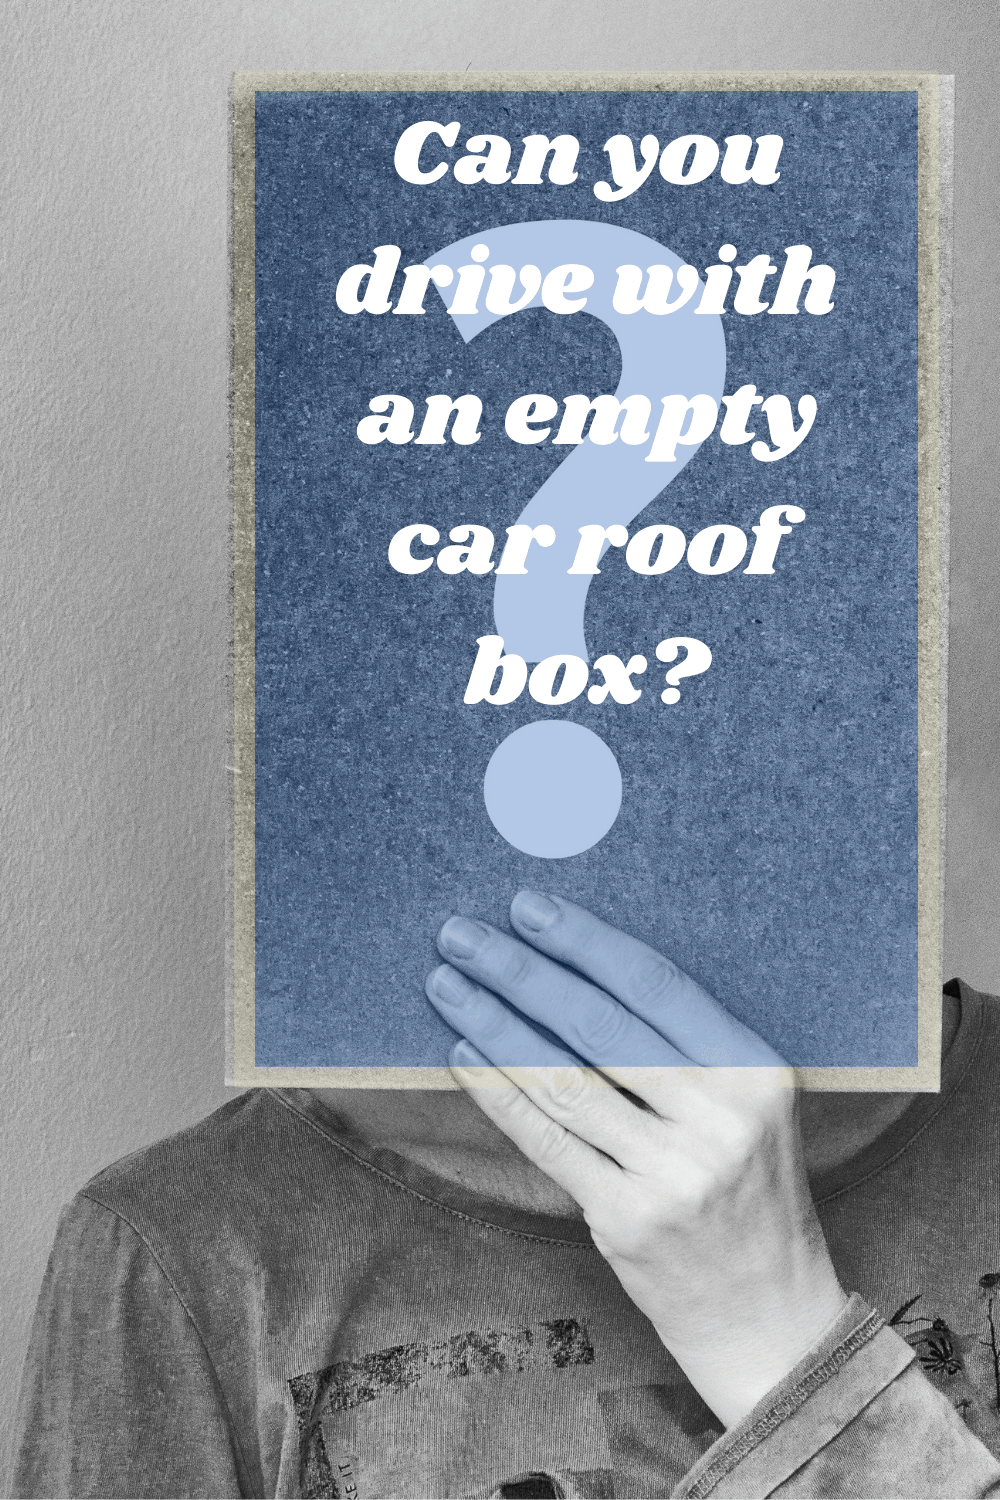 Can you drive with an empty car roof box?